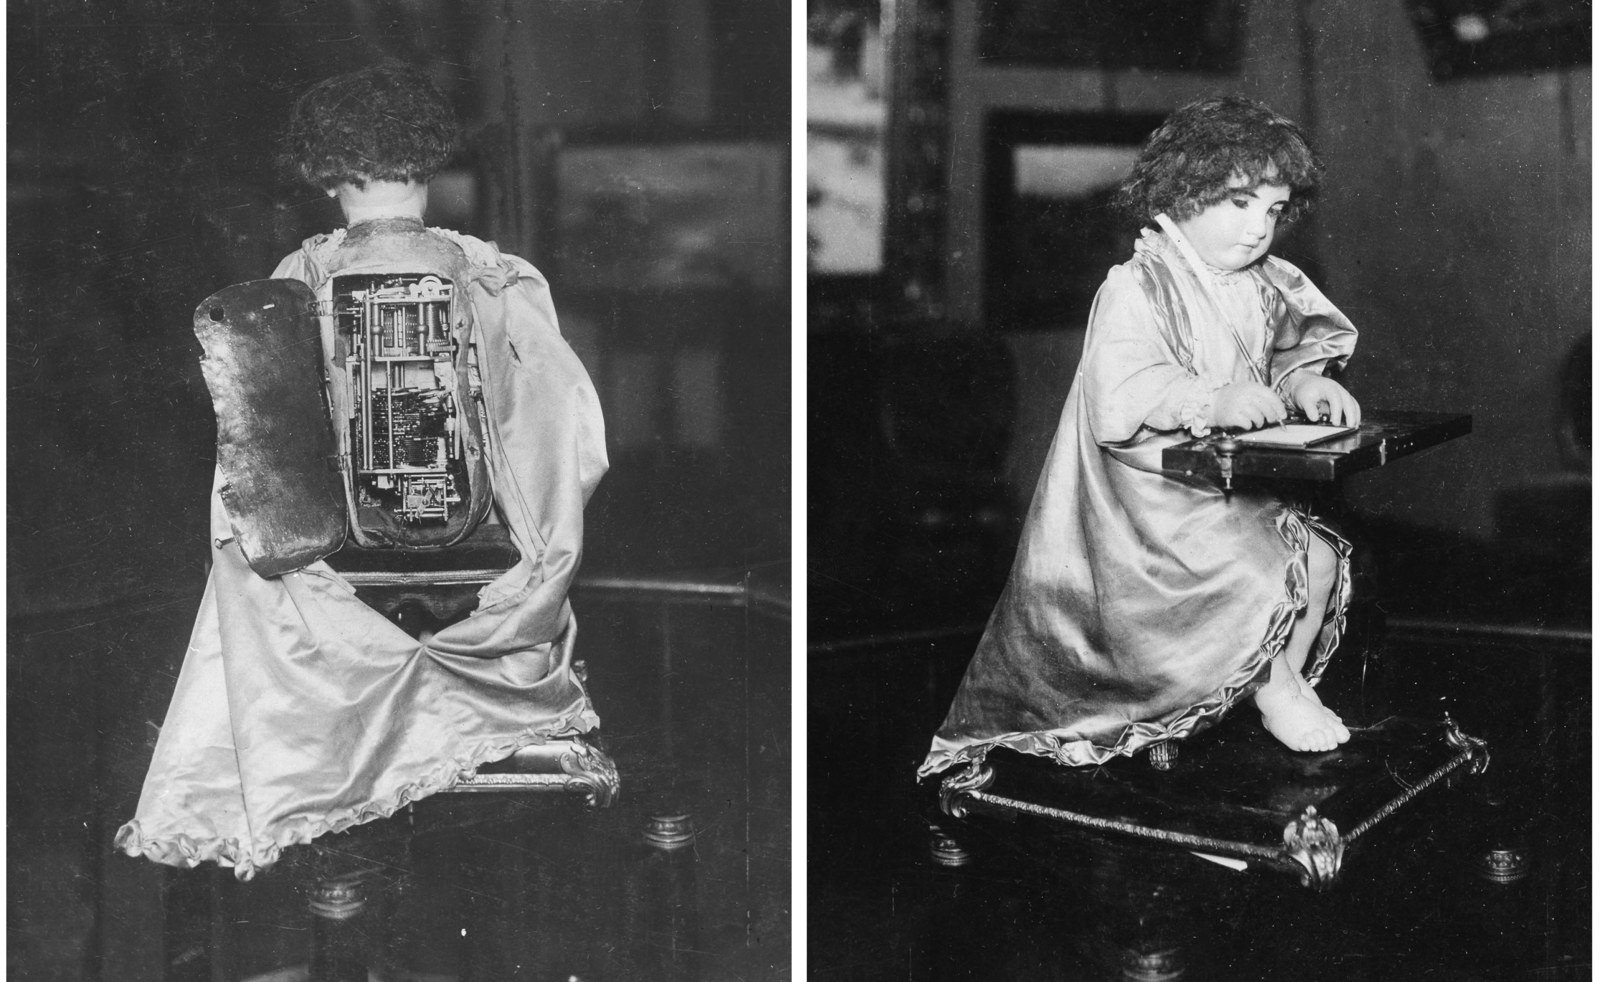 A mechanical robot child from France built in the 1890s, the picture is around 1920.